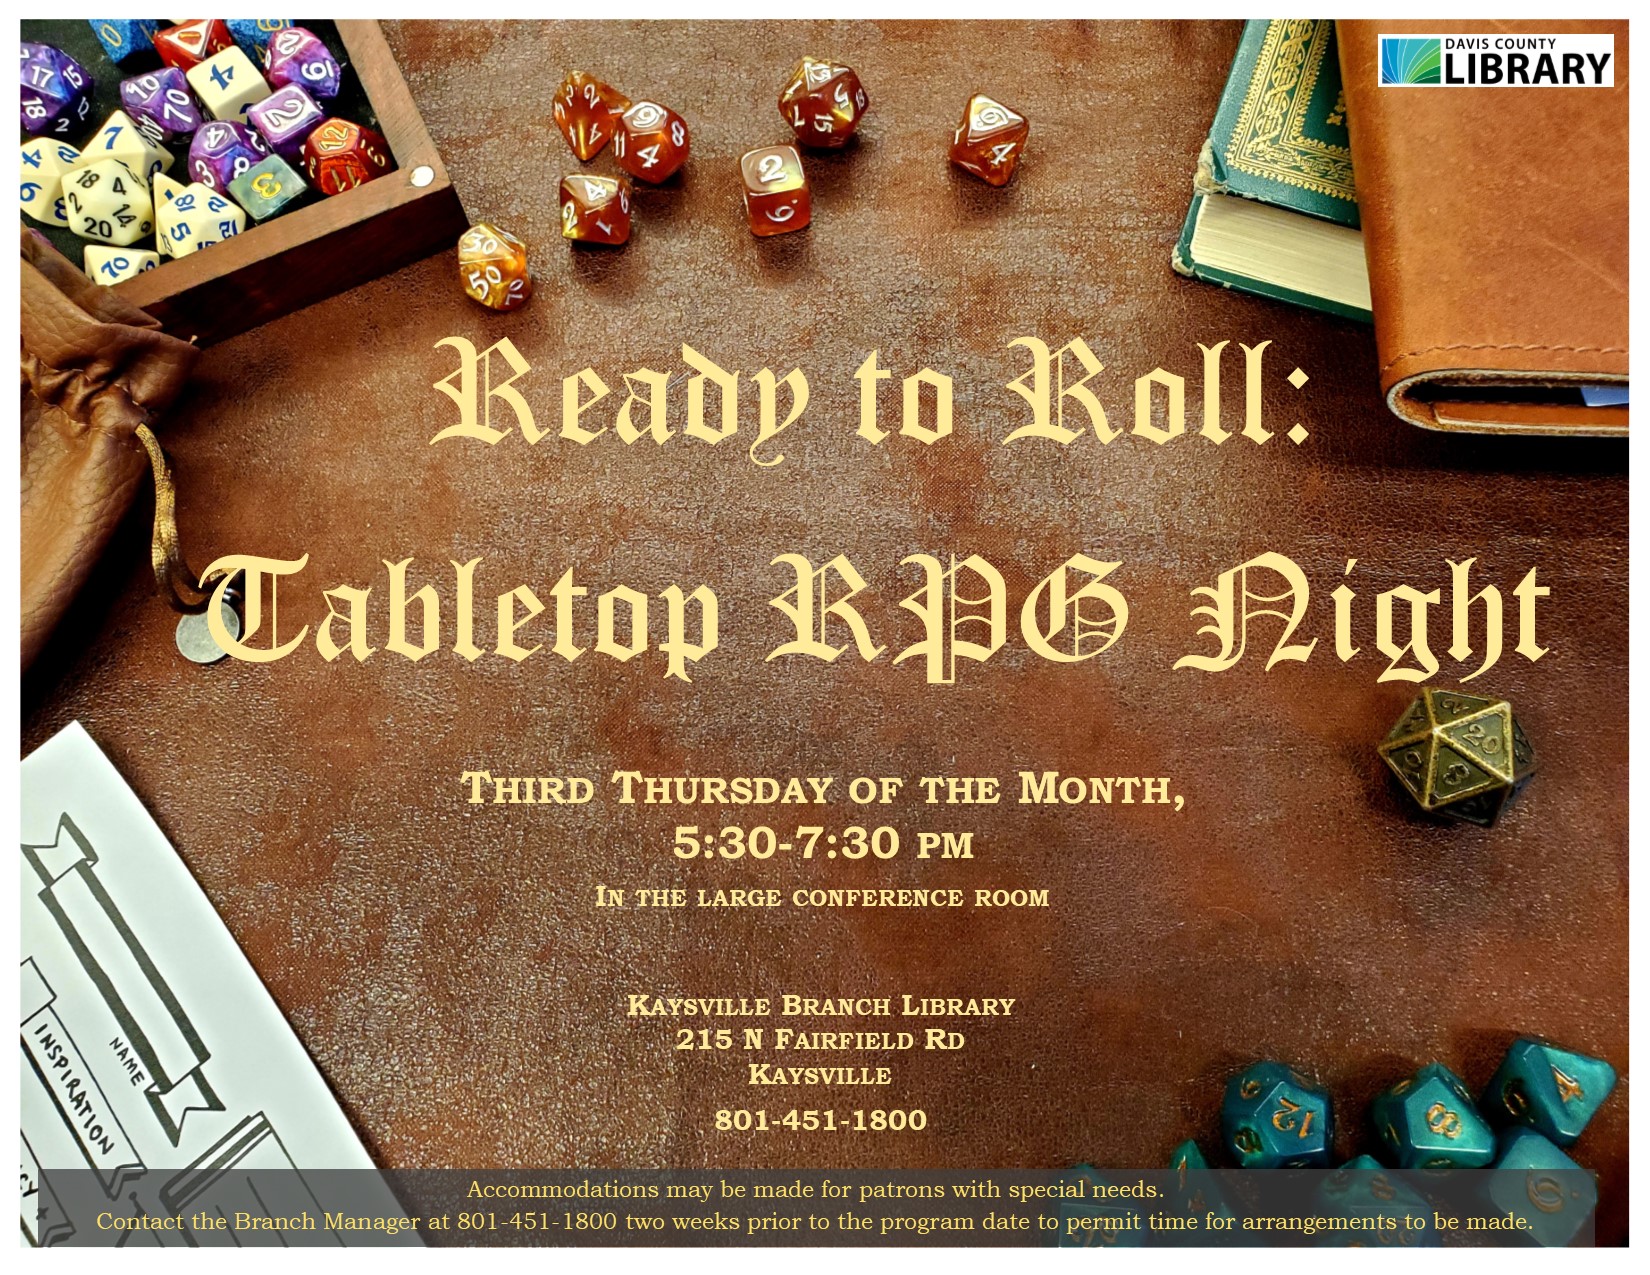 Ready to Roll: Tabletop RPG Third Thursday of the Month